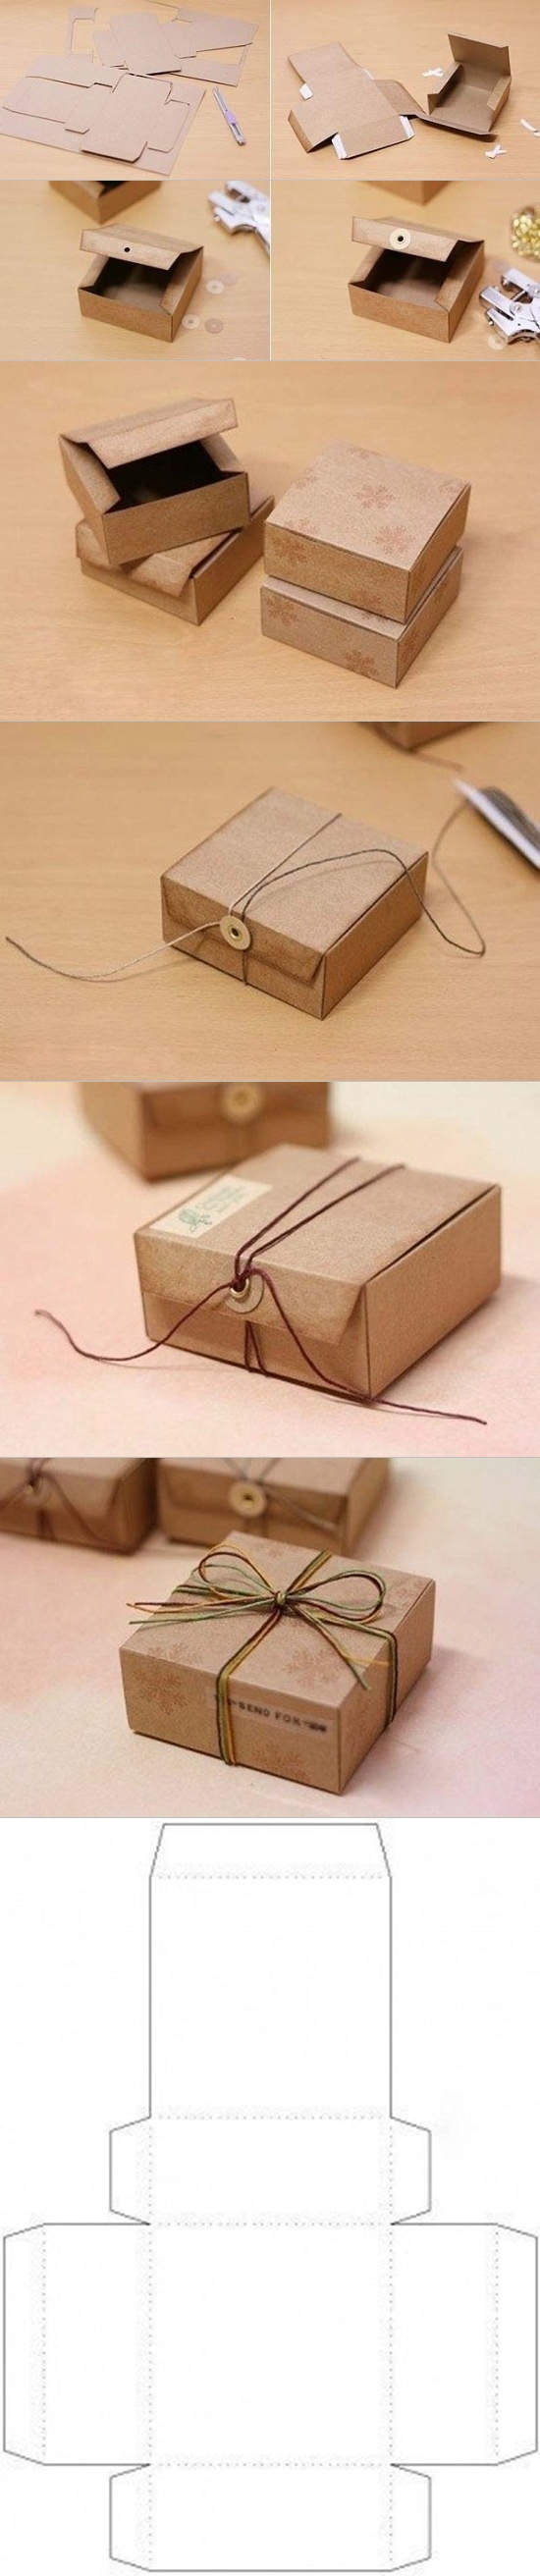 gift box from cardboard tutorial